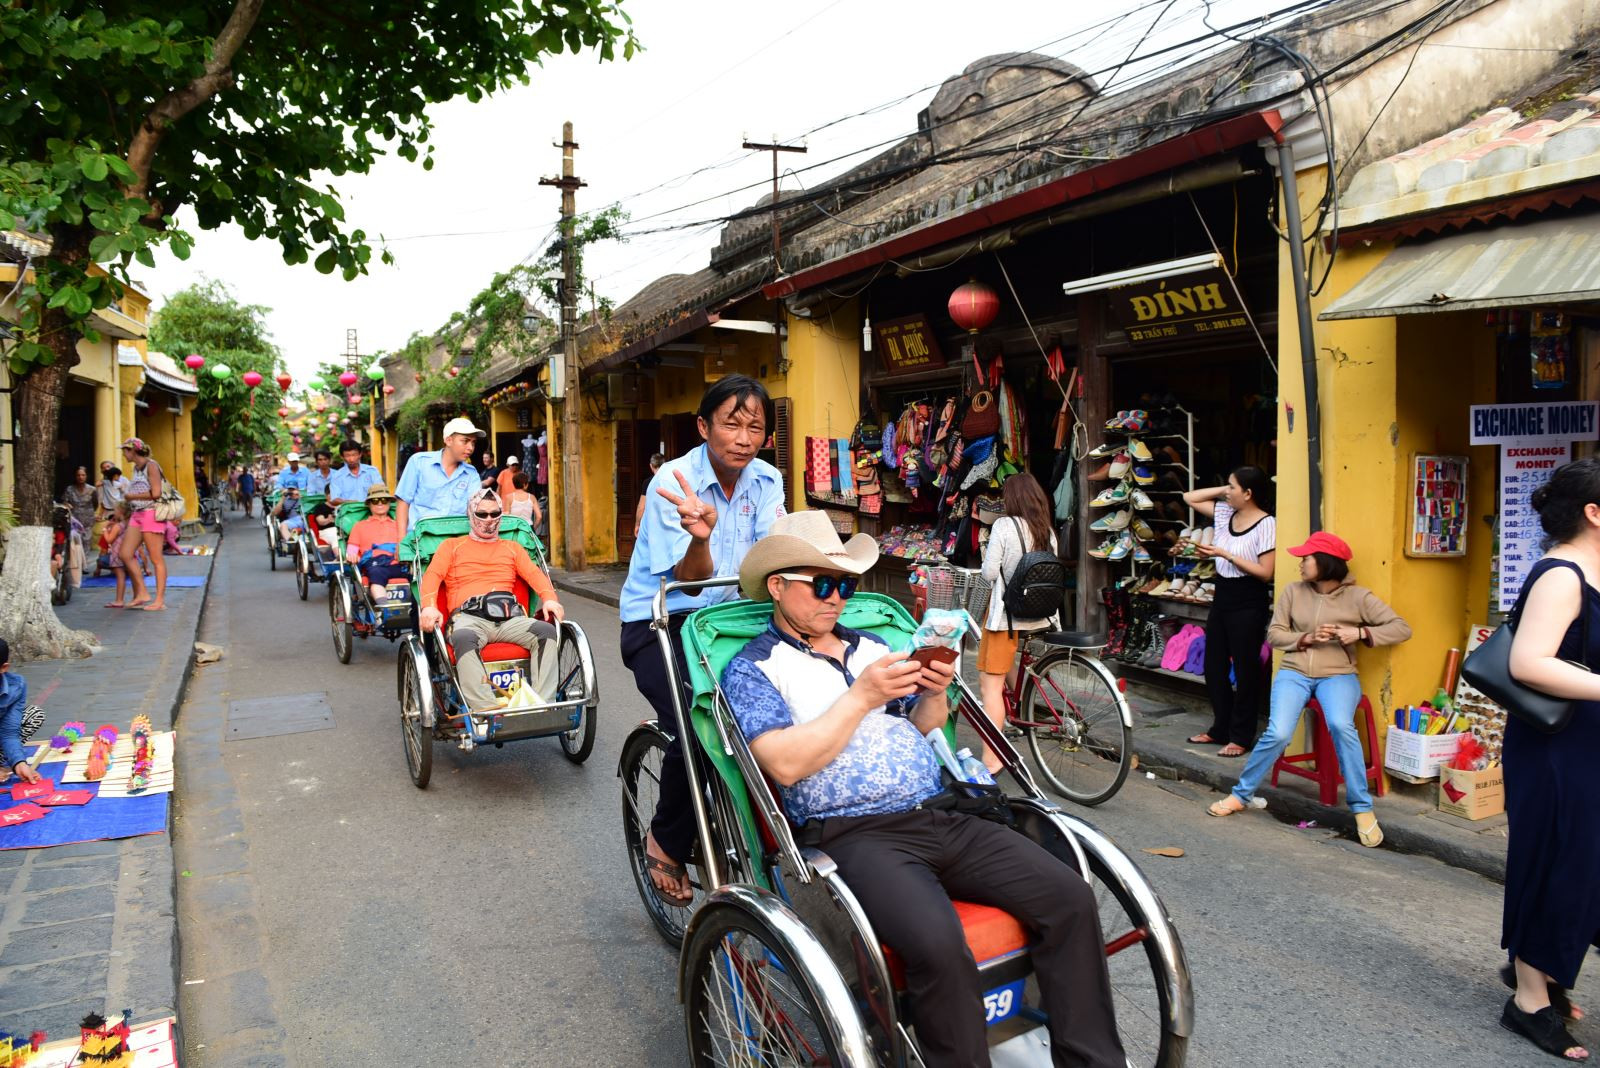 Tourists on cycles in Hoi An ancient town. Photo: baotintuc